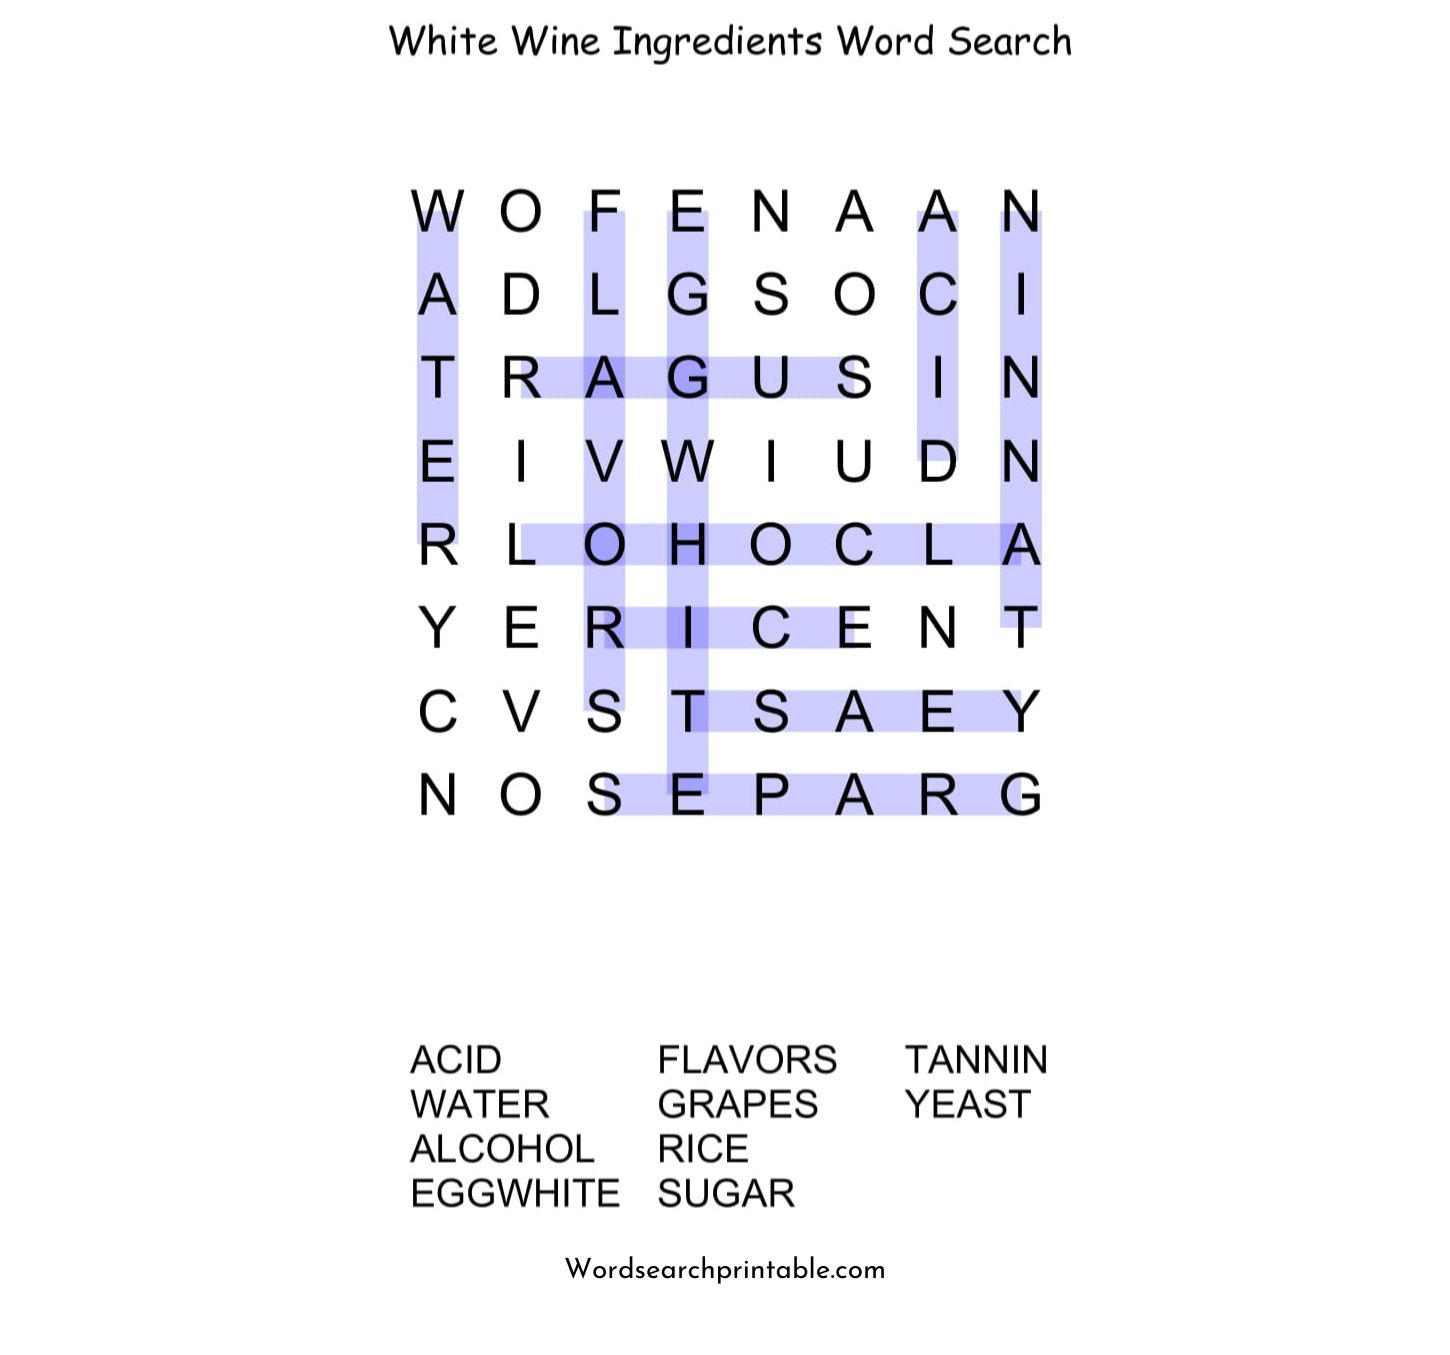 white wine ingredients word search puzzle solution